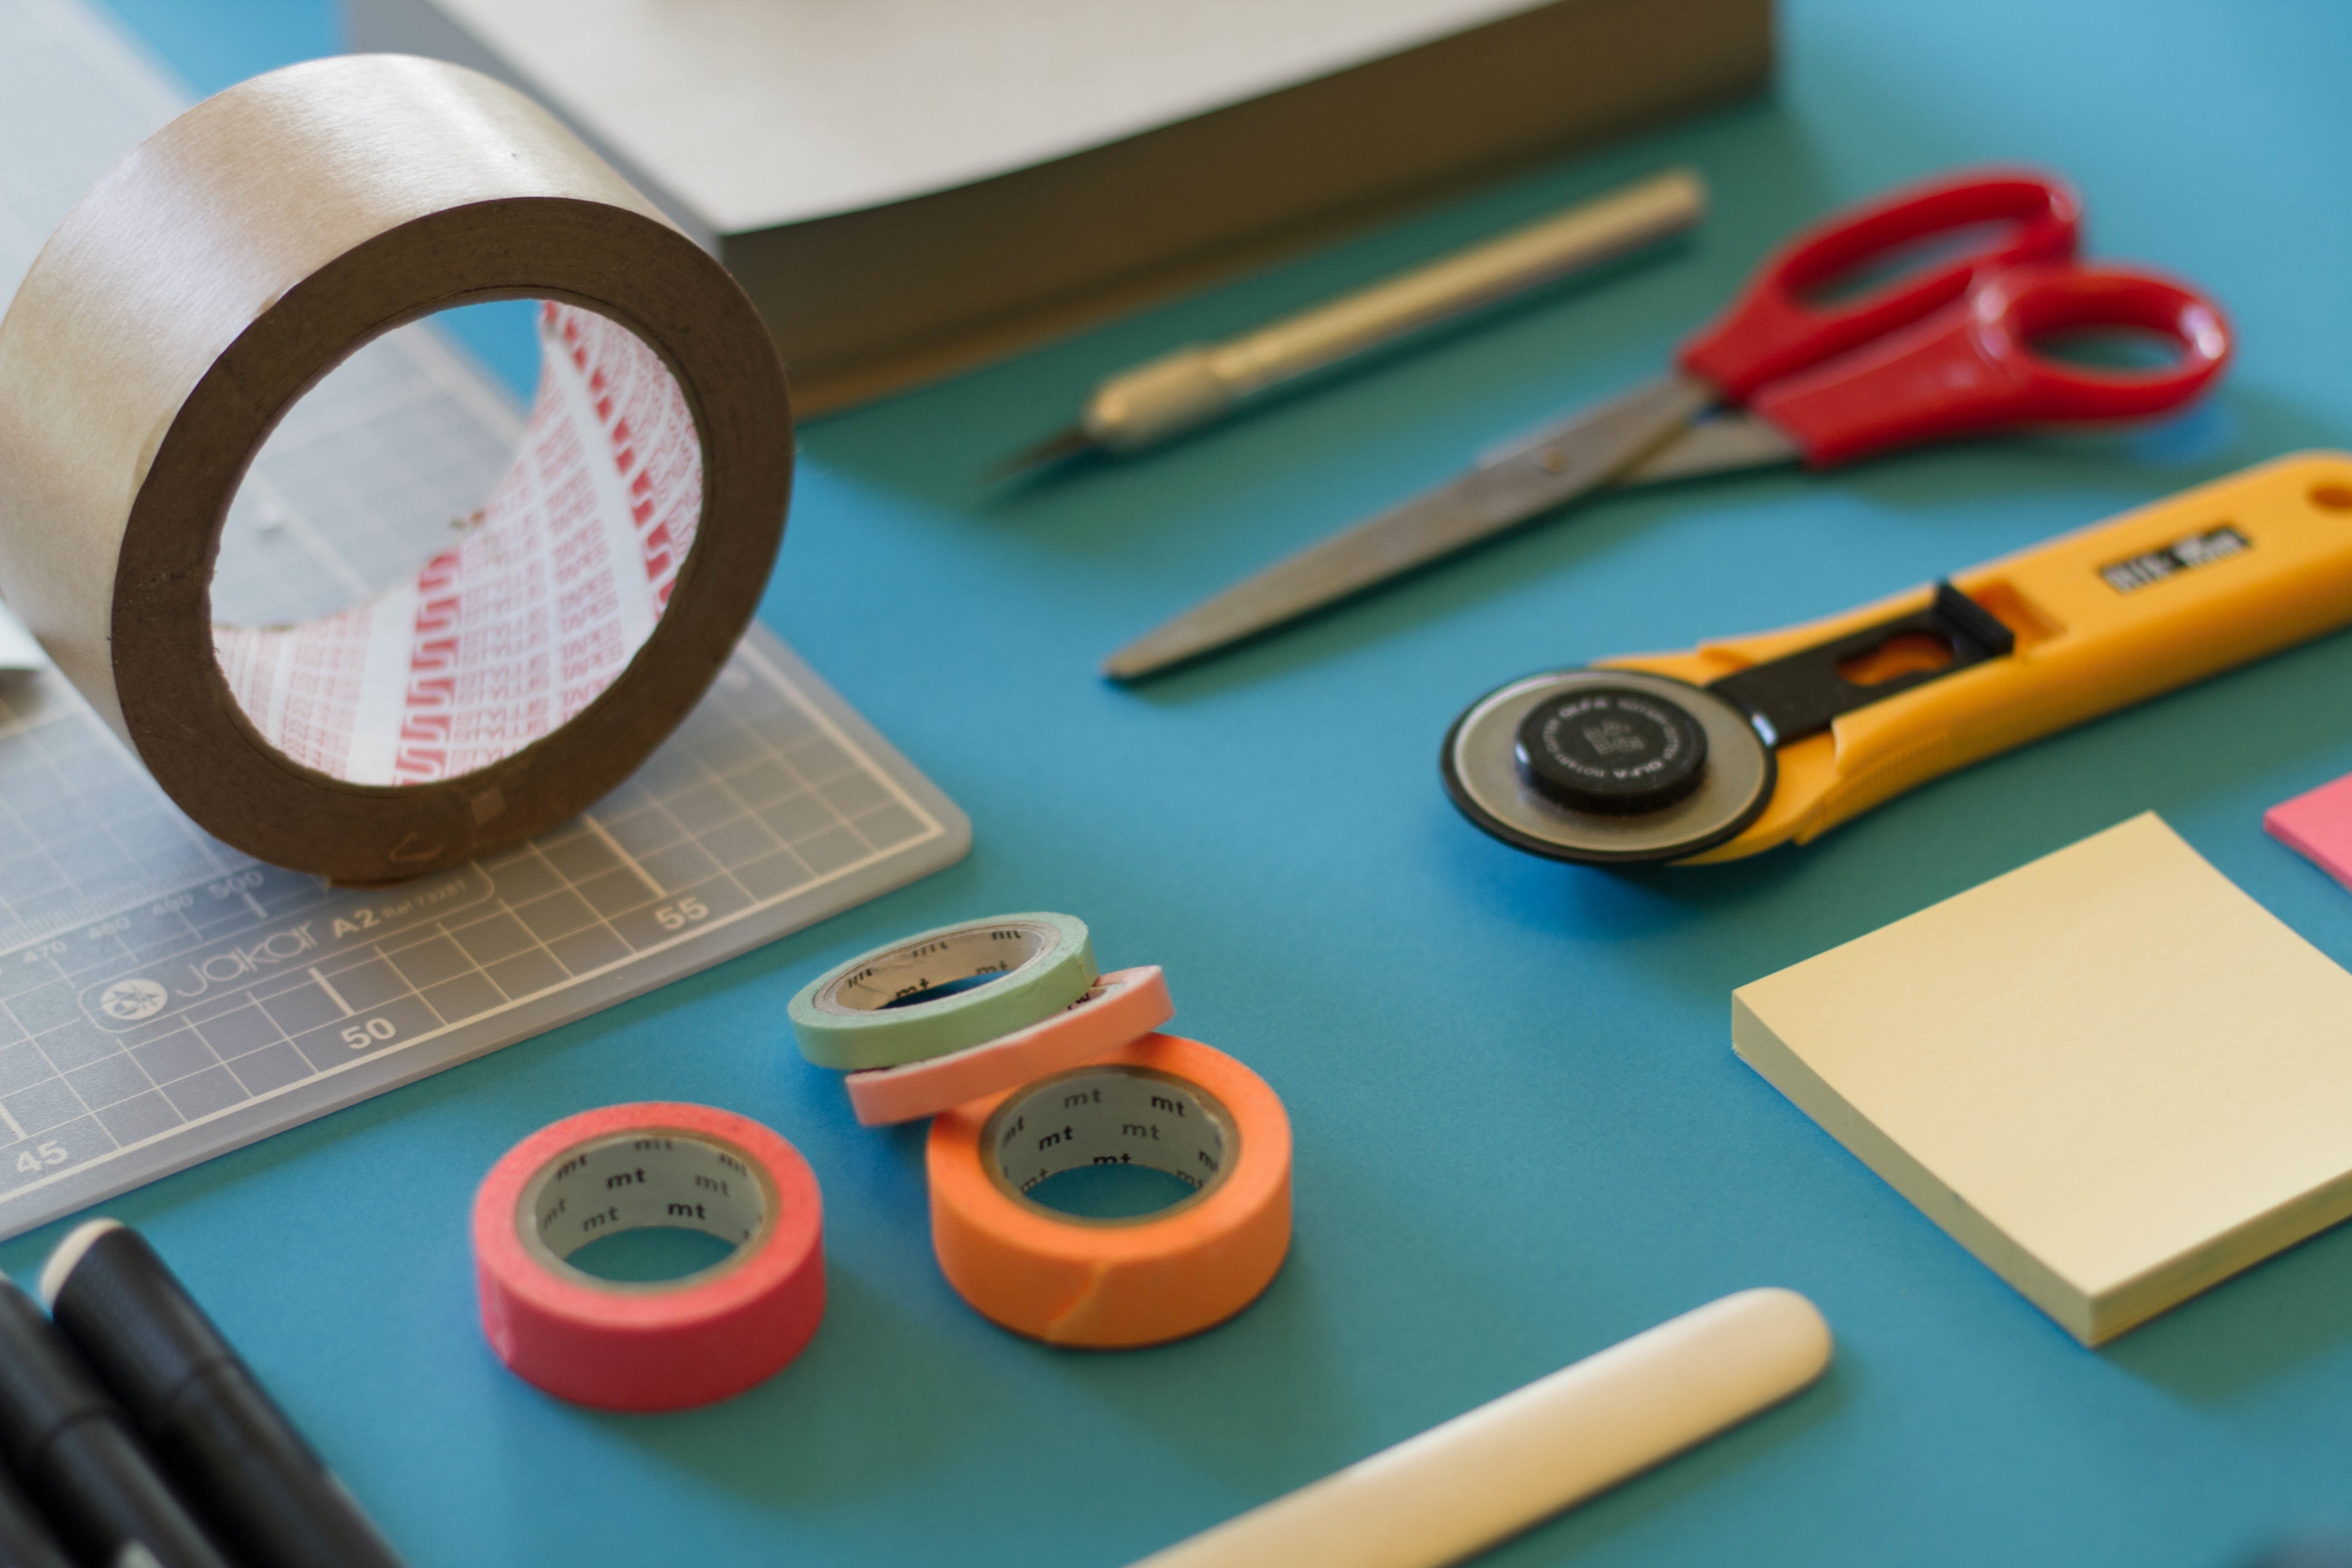 adhesive tapes, scissors, sticky notes and utility knife